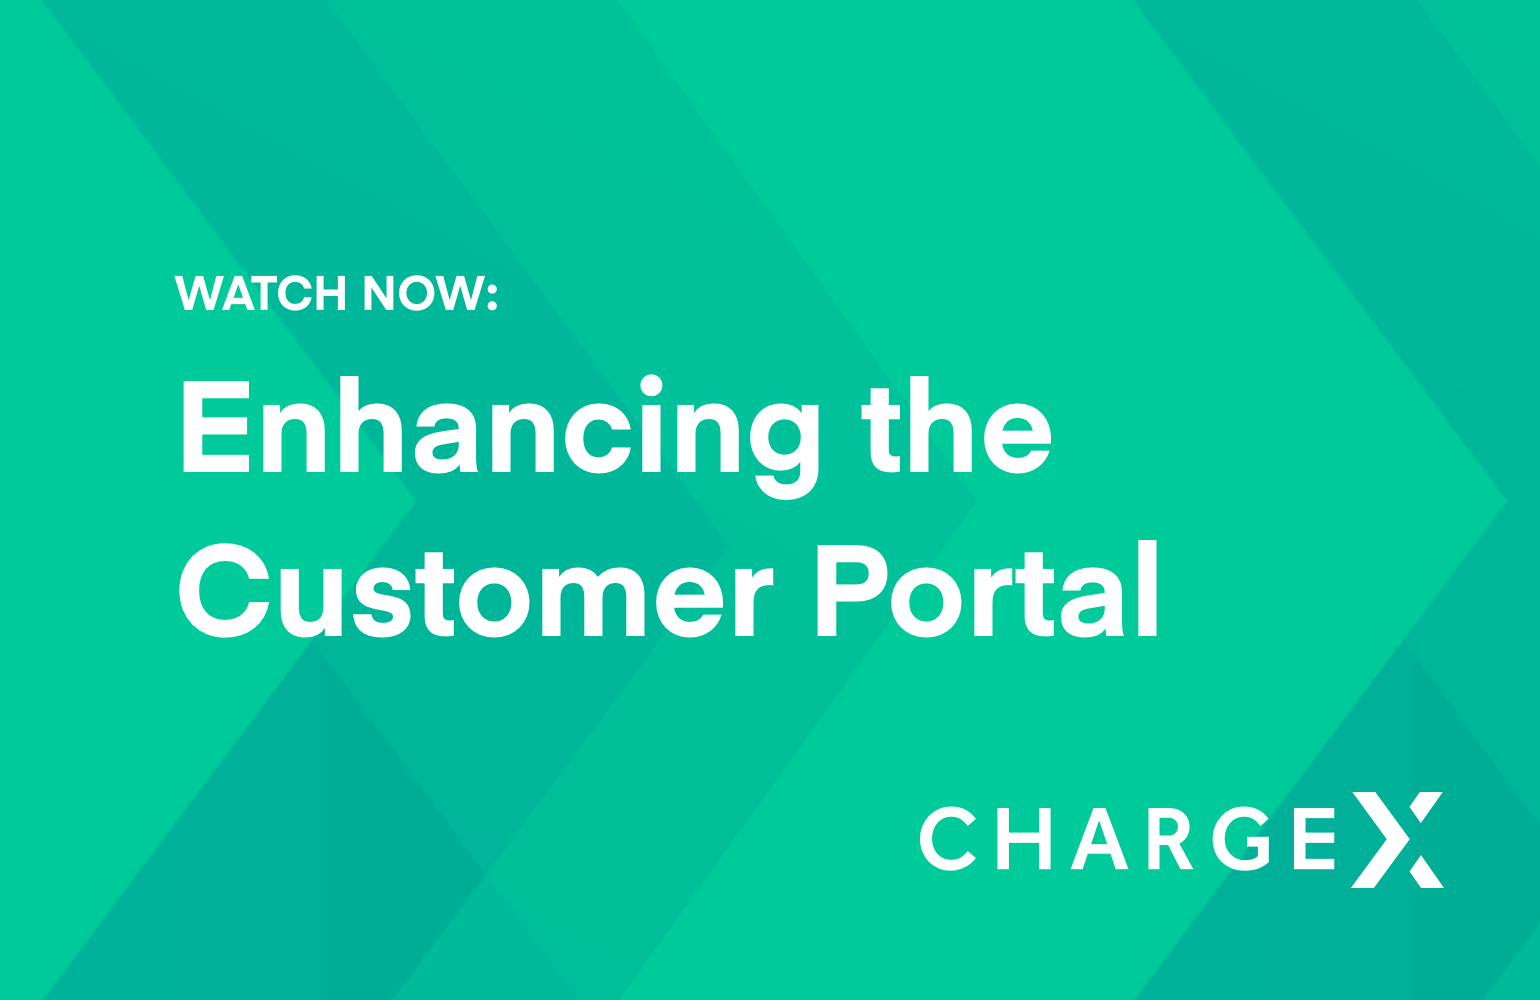 ChargeX: Enhancing the customer portal